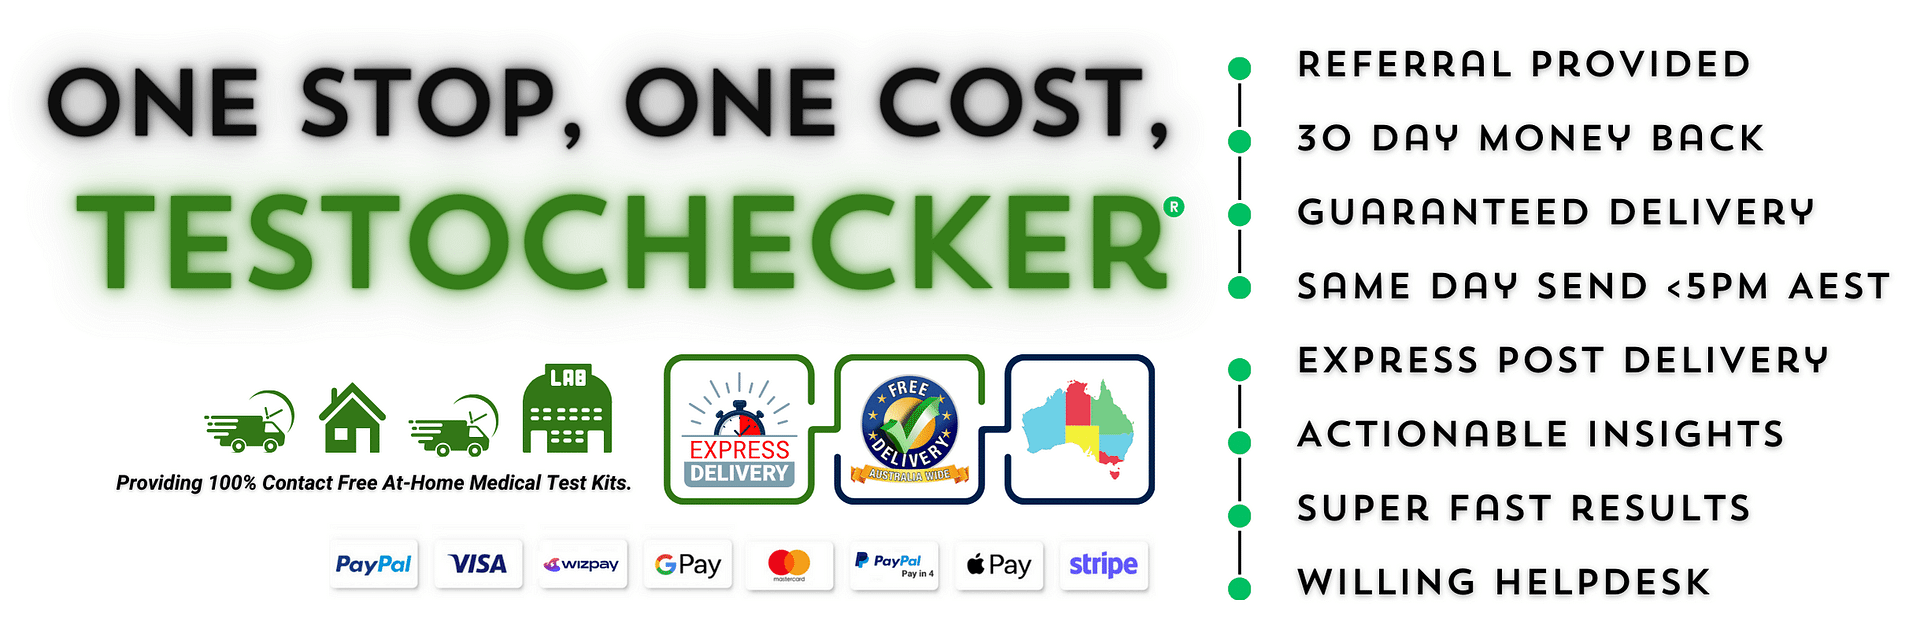 one stop one cost at testochecker in Australia.